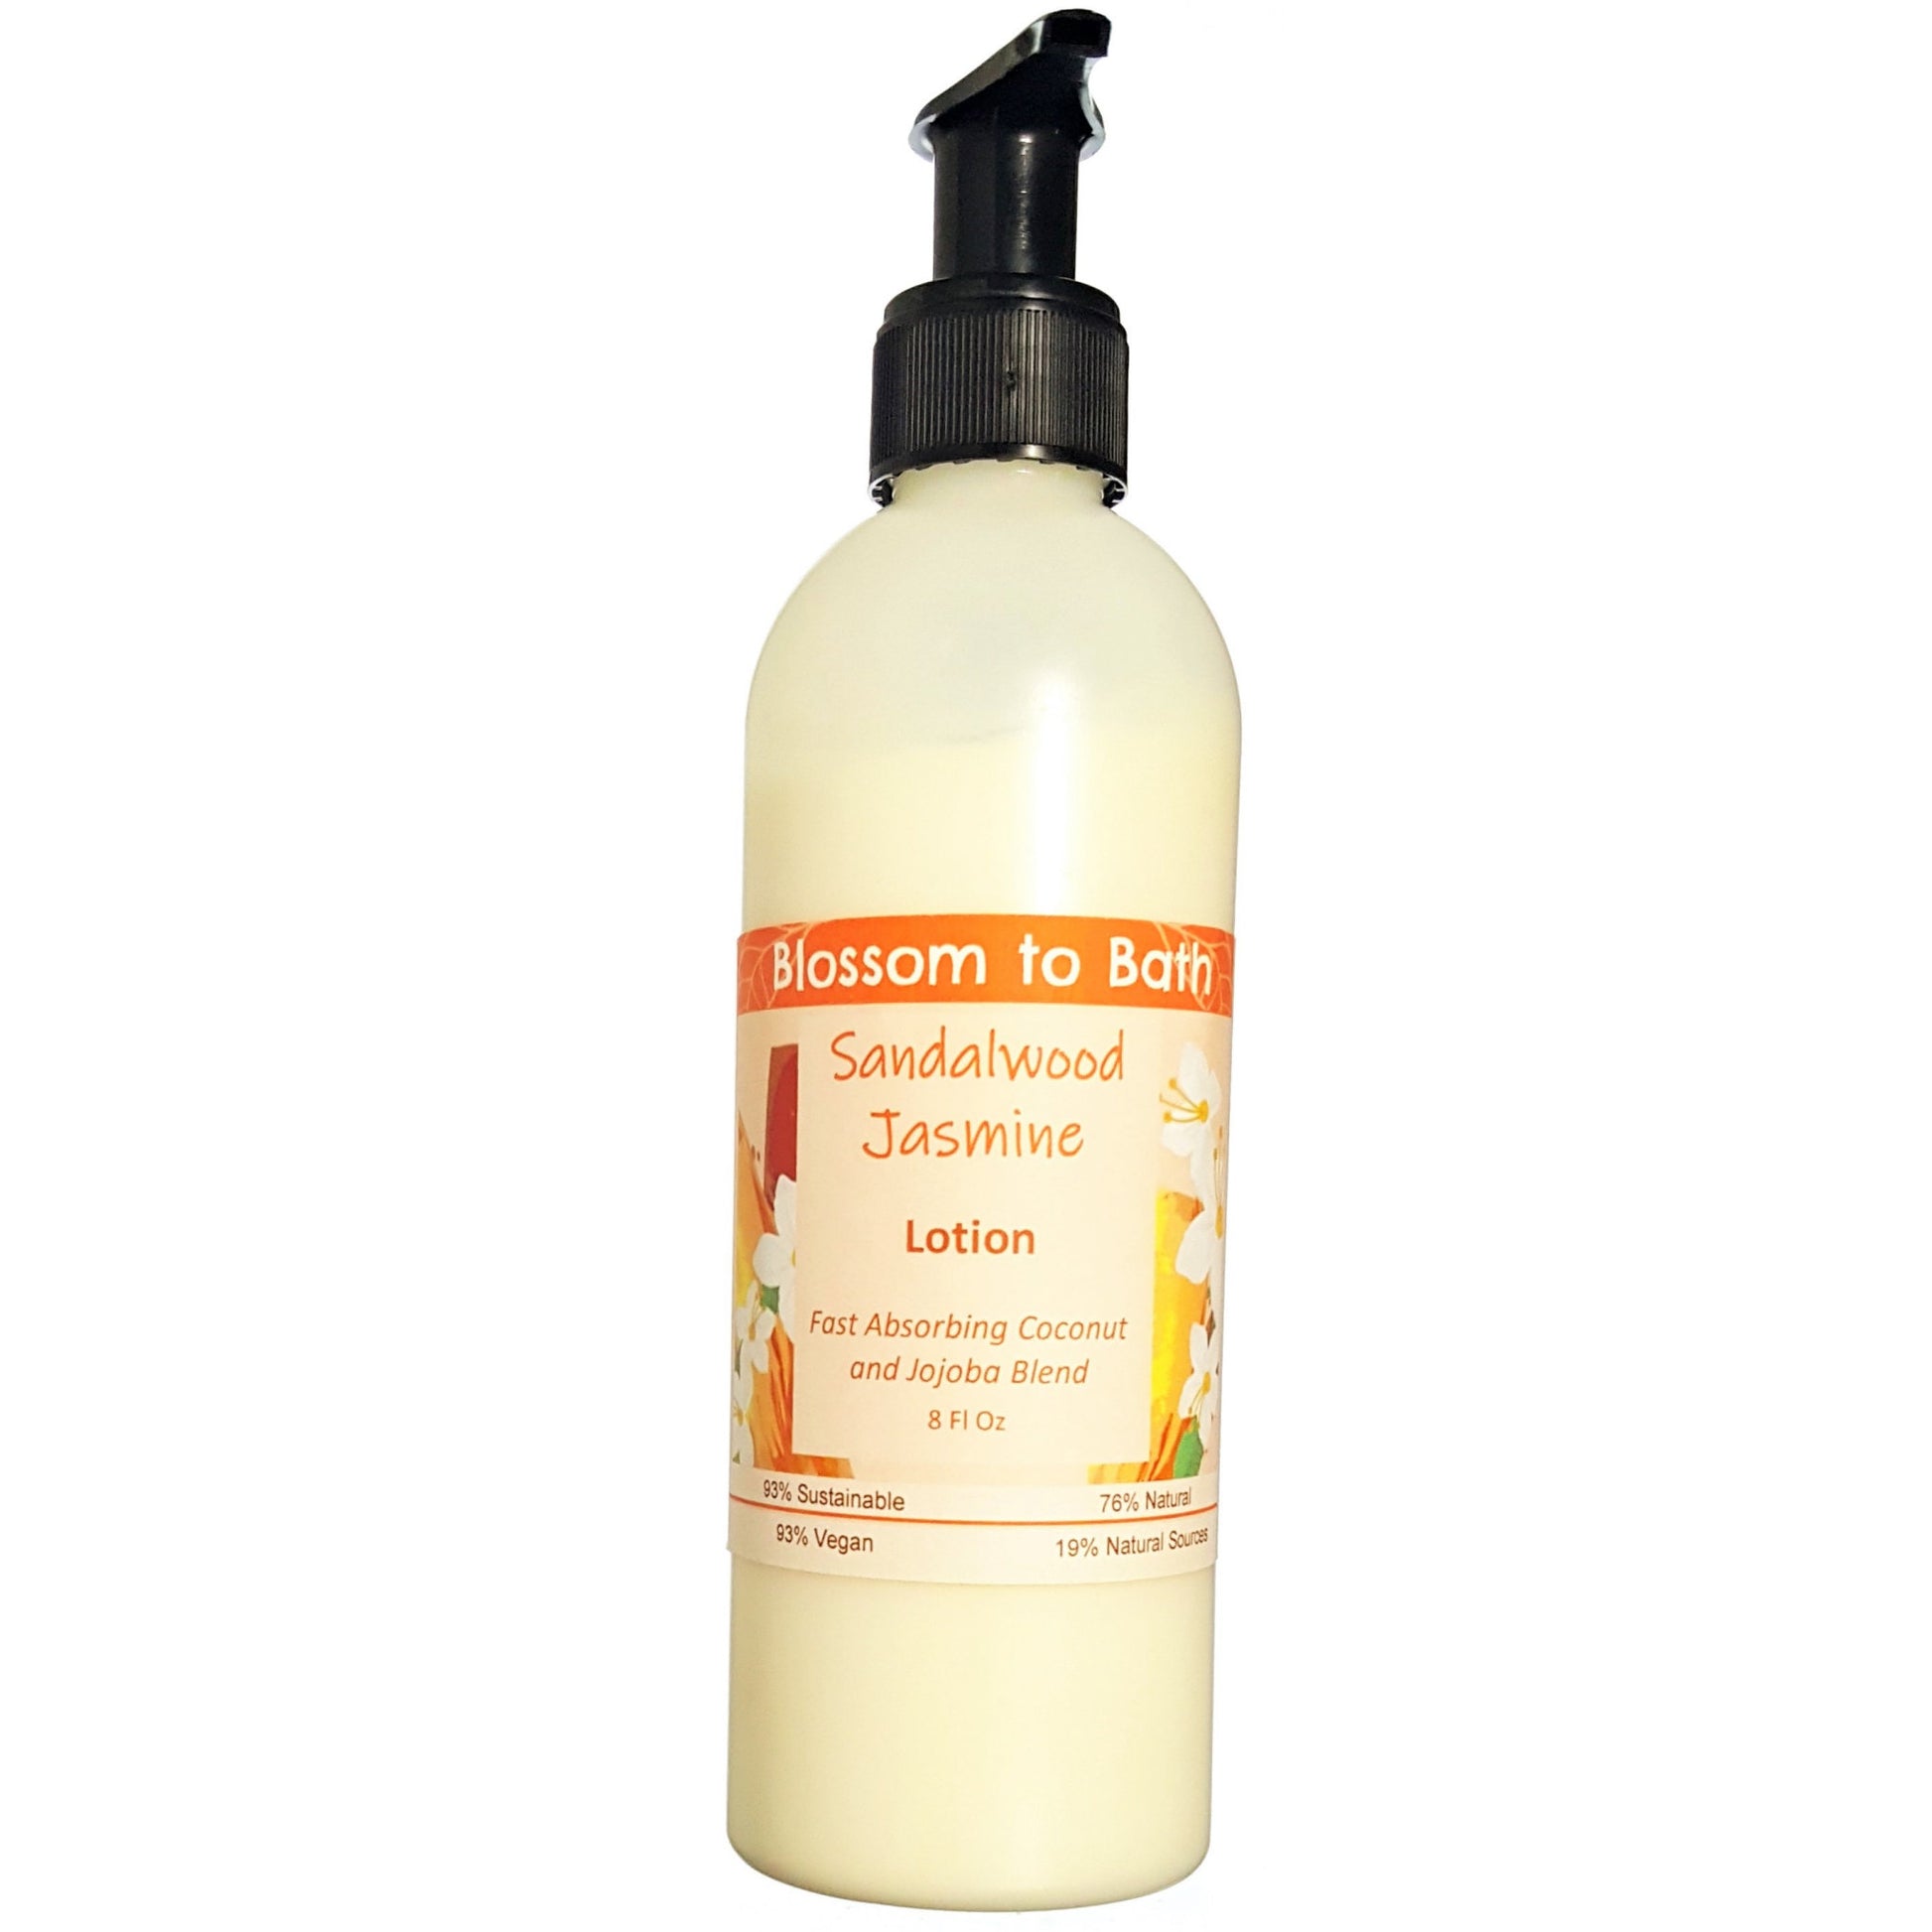 Buy Blossom to Bath Sandalwood Jasmine Lotion from Flowersong Soap Studio.  Daily moisture luxury that soaks in quickly made with organic oils and butters that soften and smooth the skin  Floral jasmine meets earthy sandalwood to create a soul stirring blend.